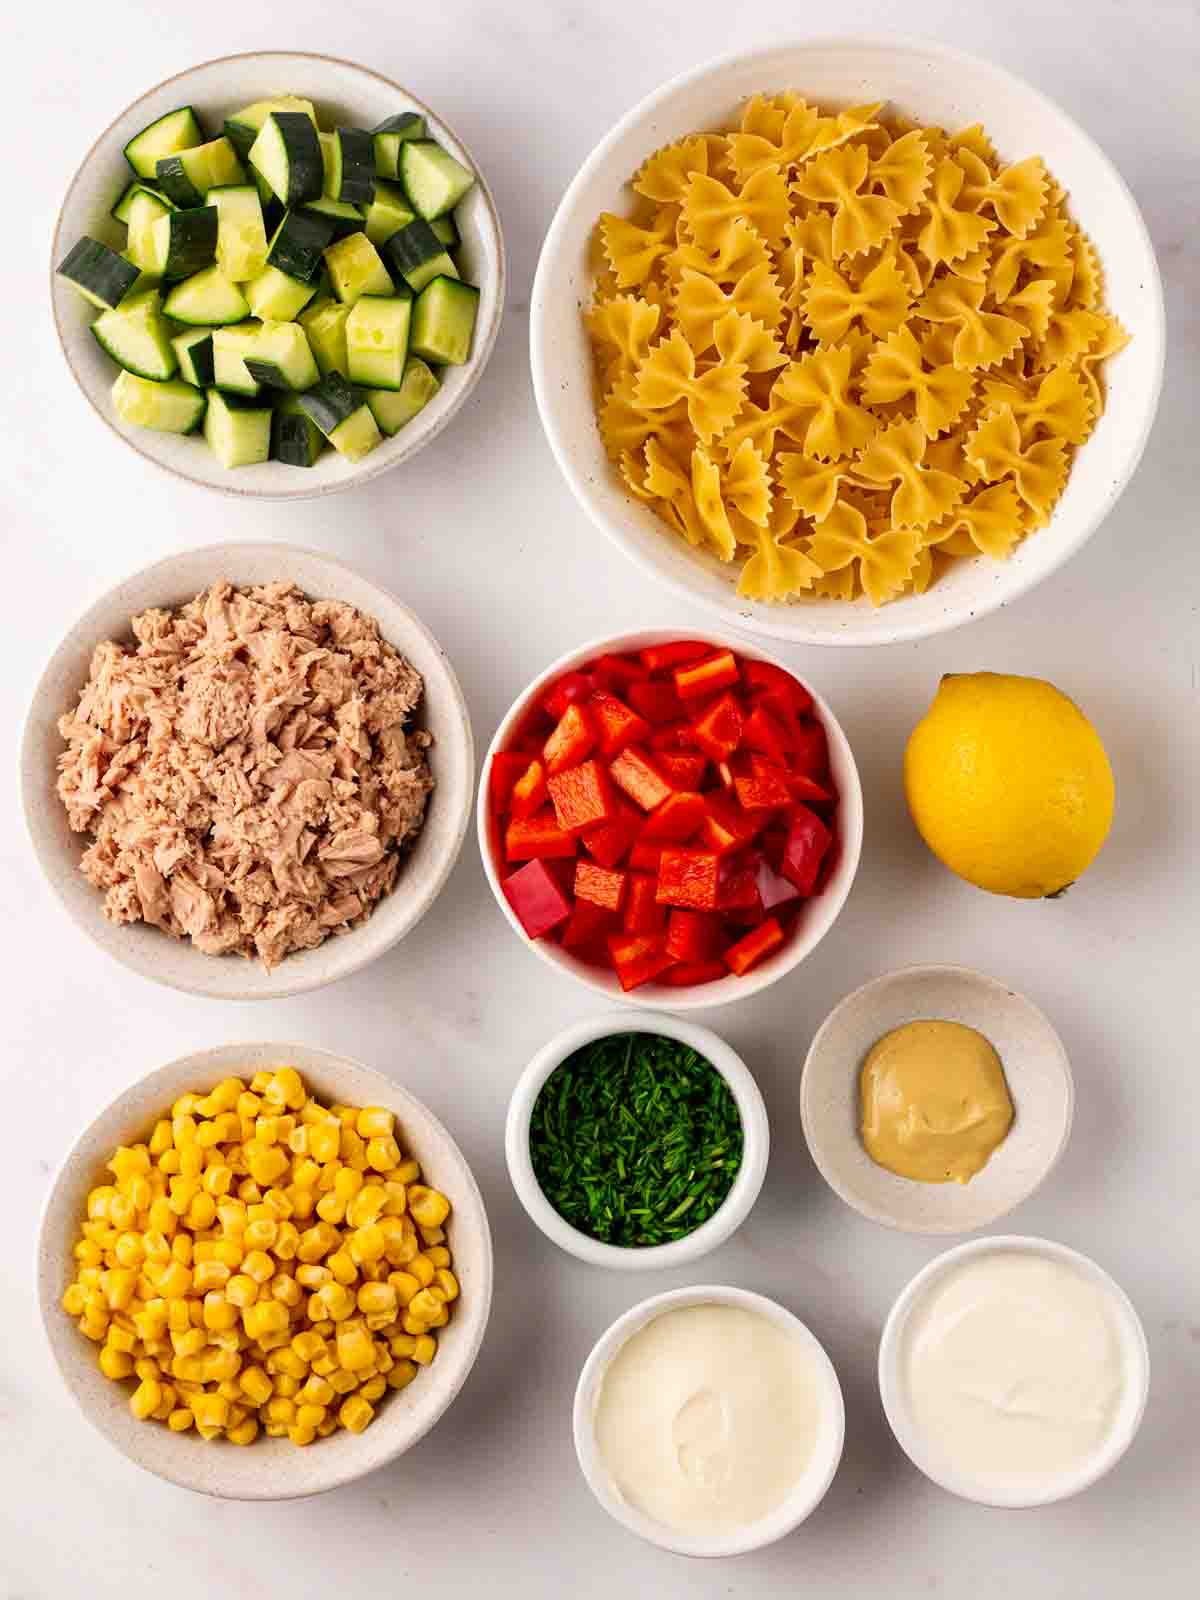 Ingredients for Tuna Pasta Salad with pasta, cucumber, peppers and corn in little bowls on a counter top.